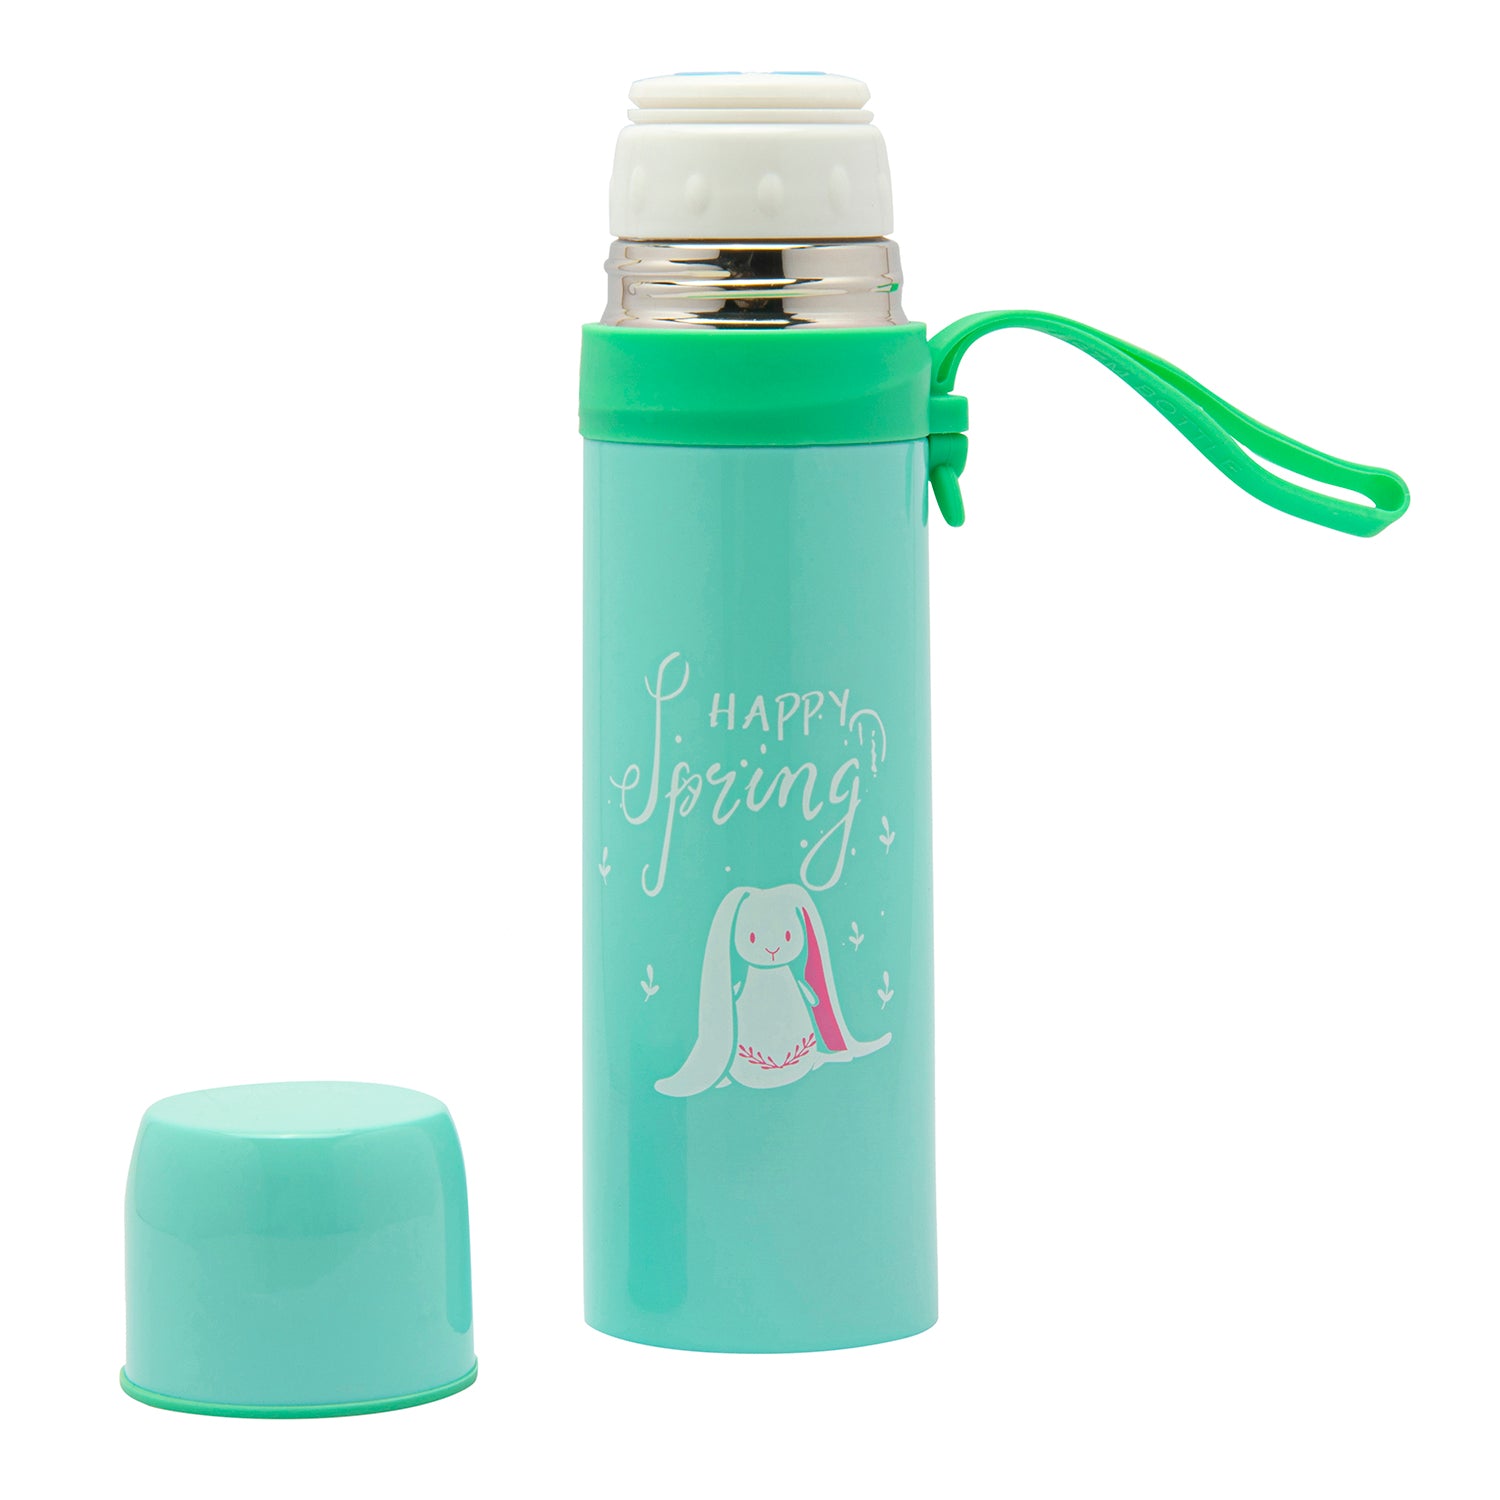 Happy Spring Sky Blue 500 ml Stainless Steel Flask